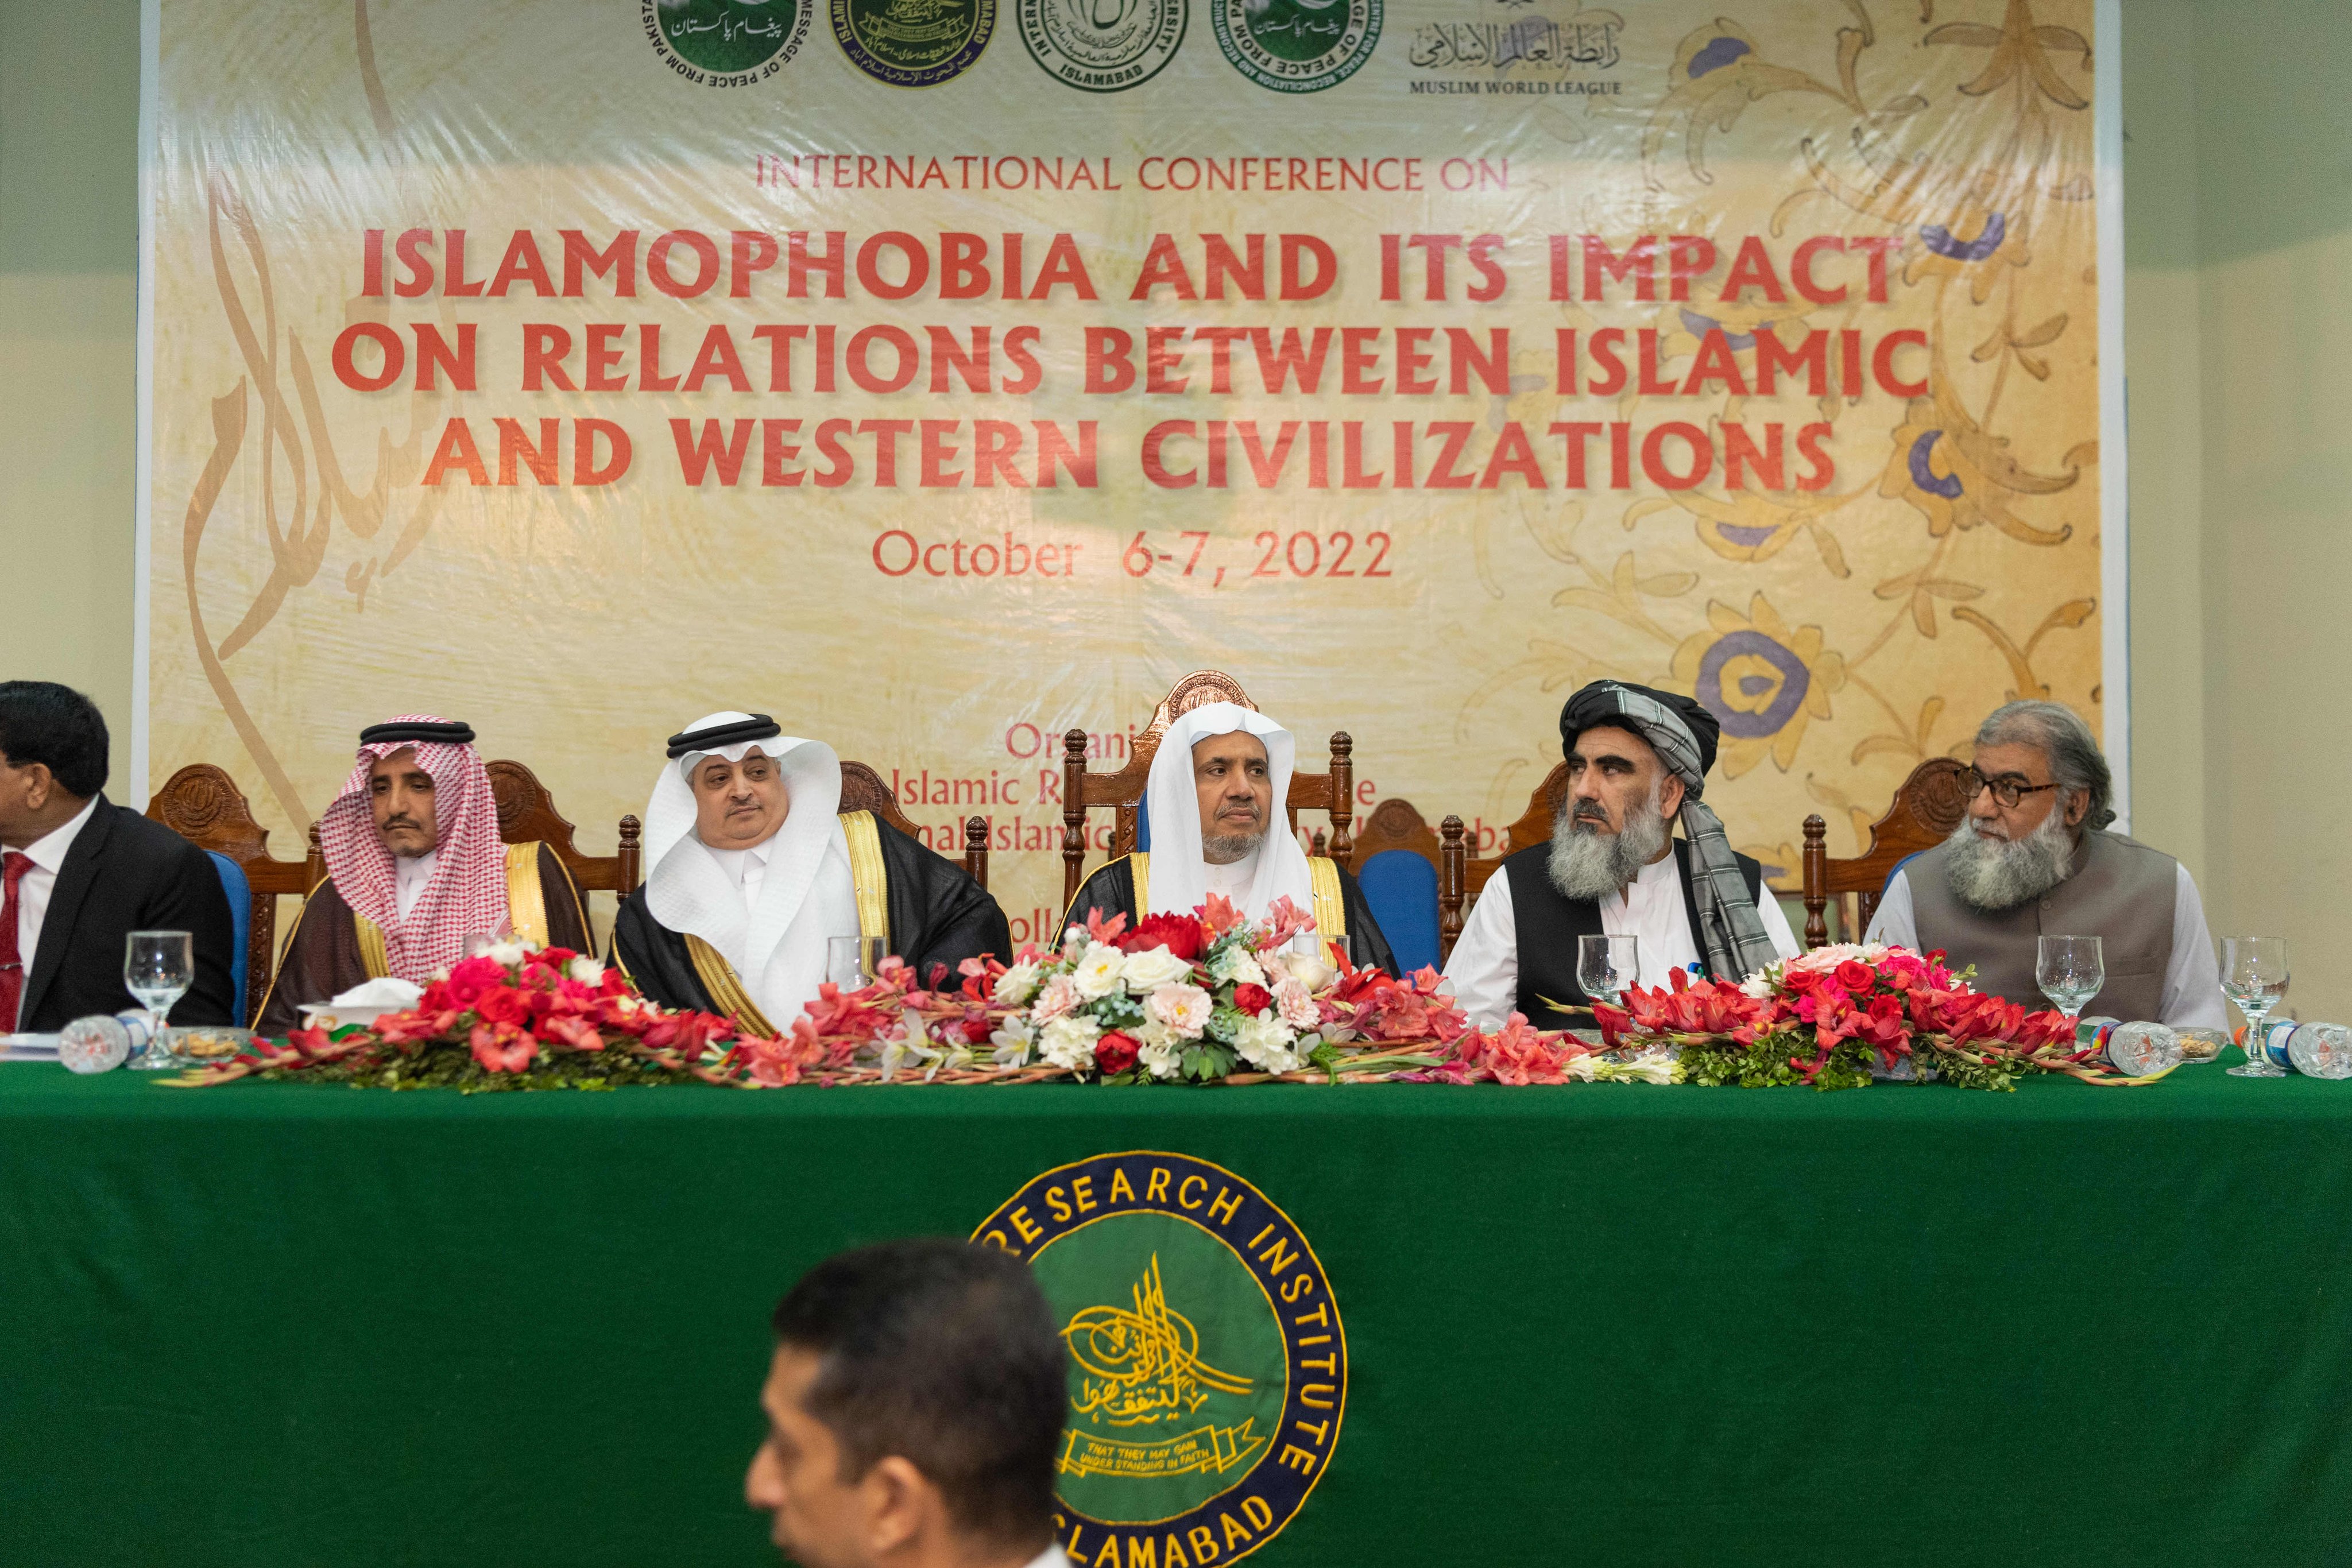 Dr. Al-Issa Serves as Chief Guest at Pakistan’s International Conference